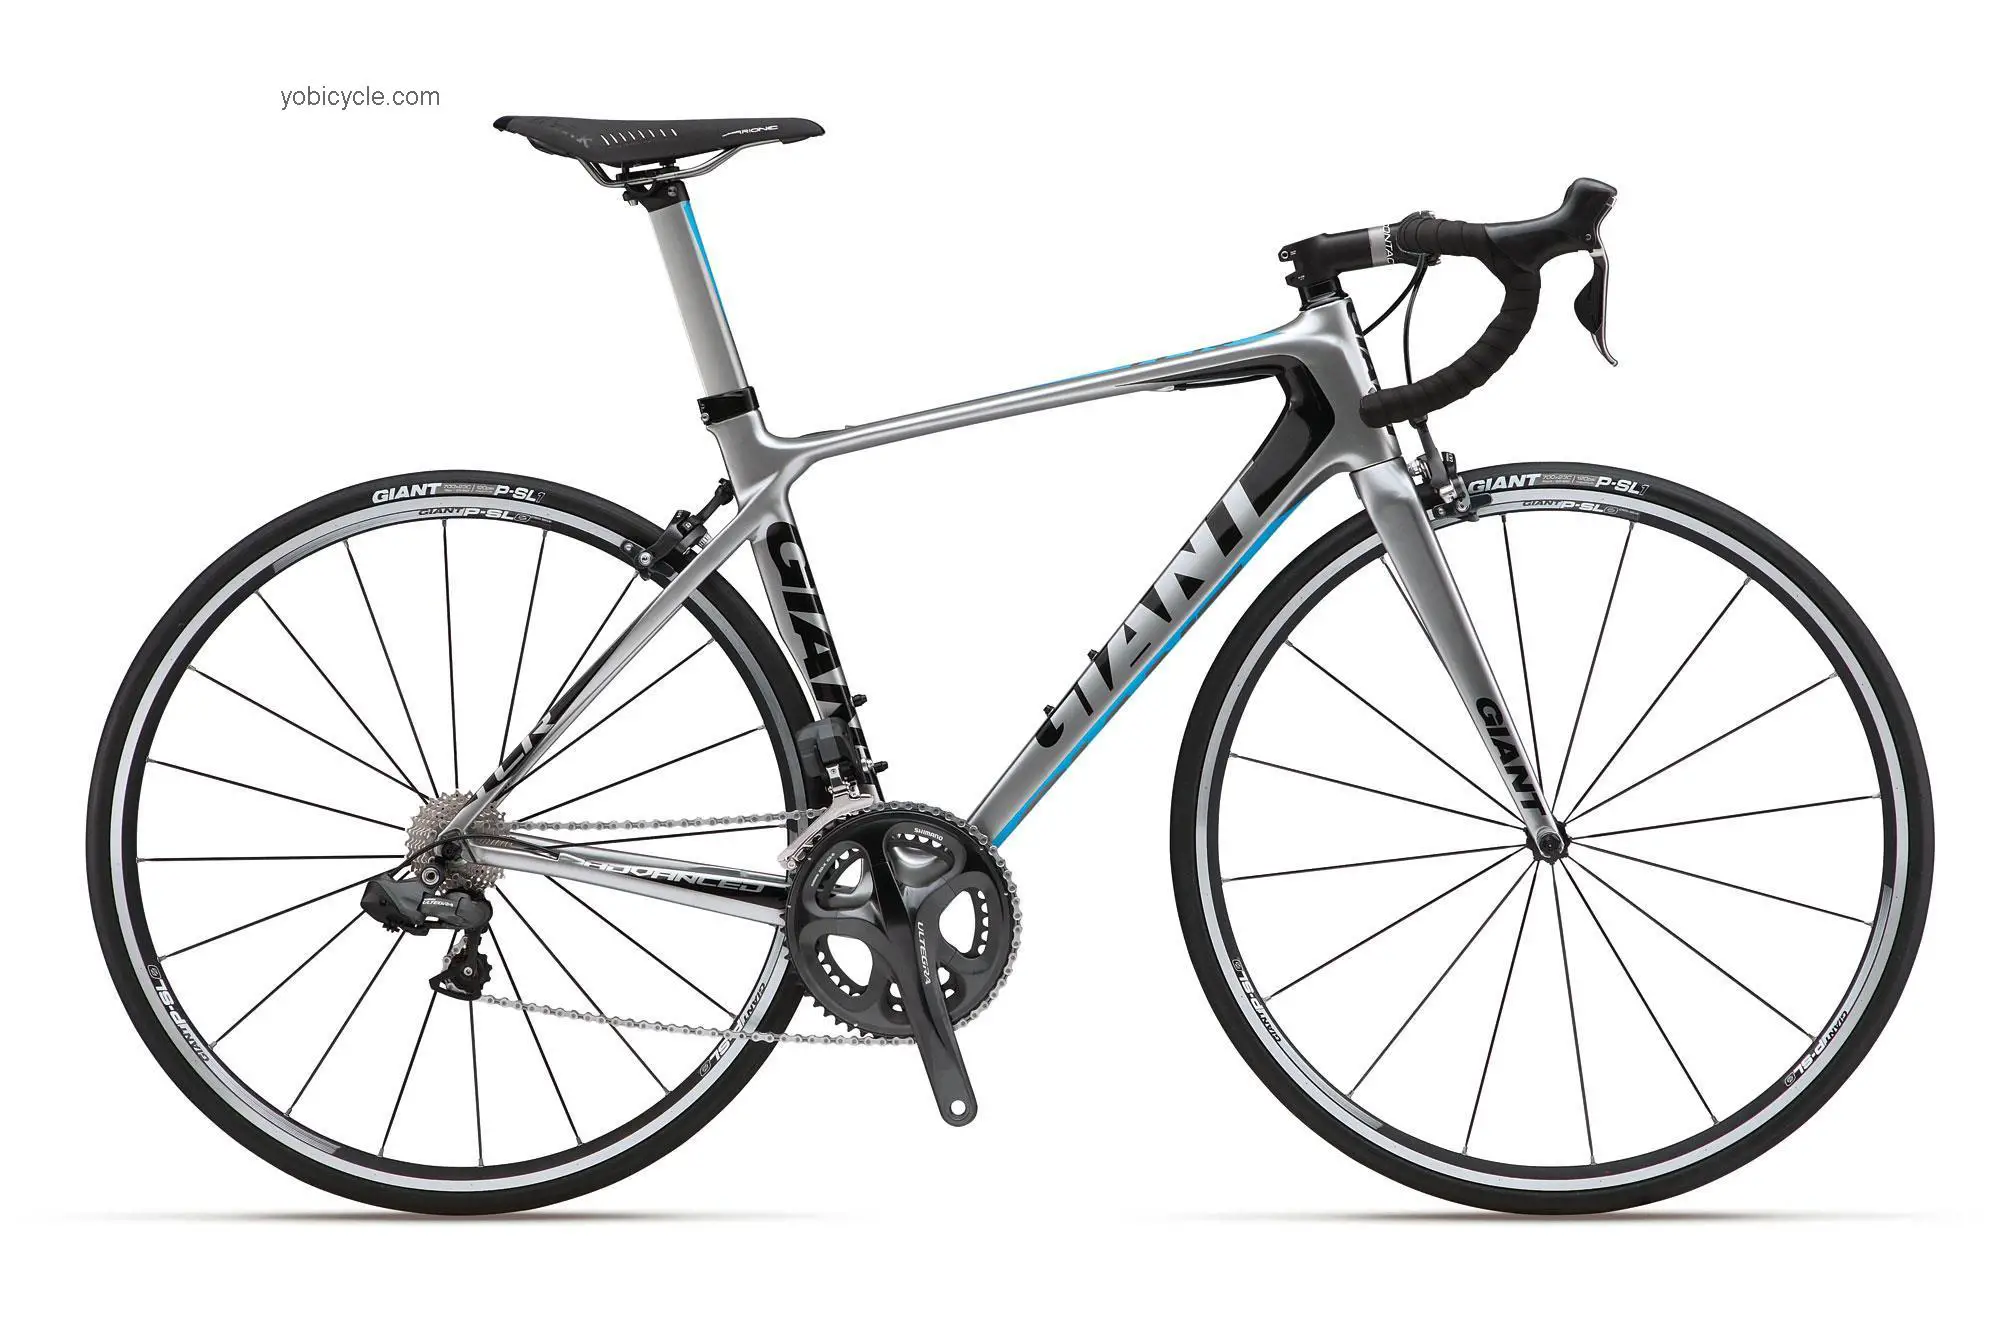 Giant TCR Advanced 0 Double 2012 comparison online with competitors